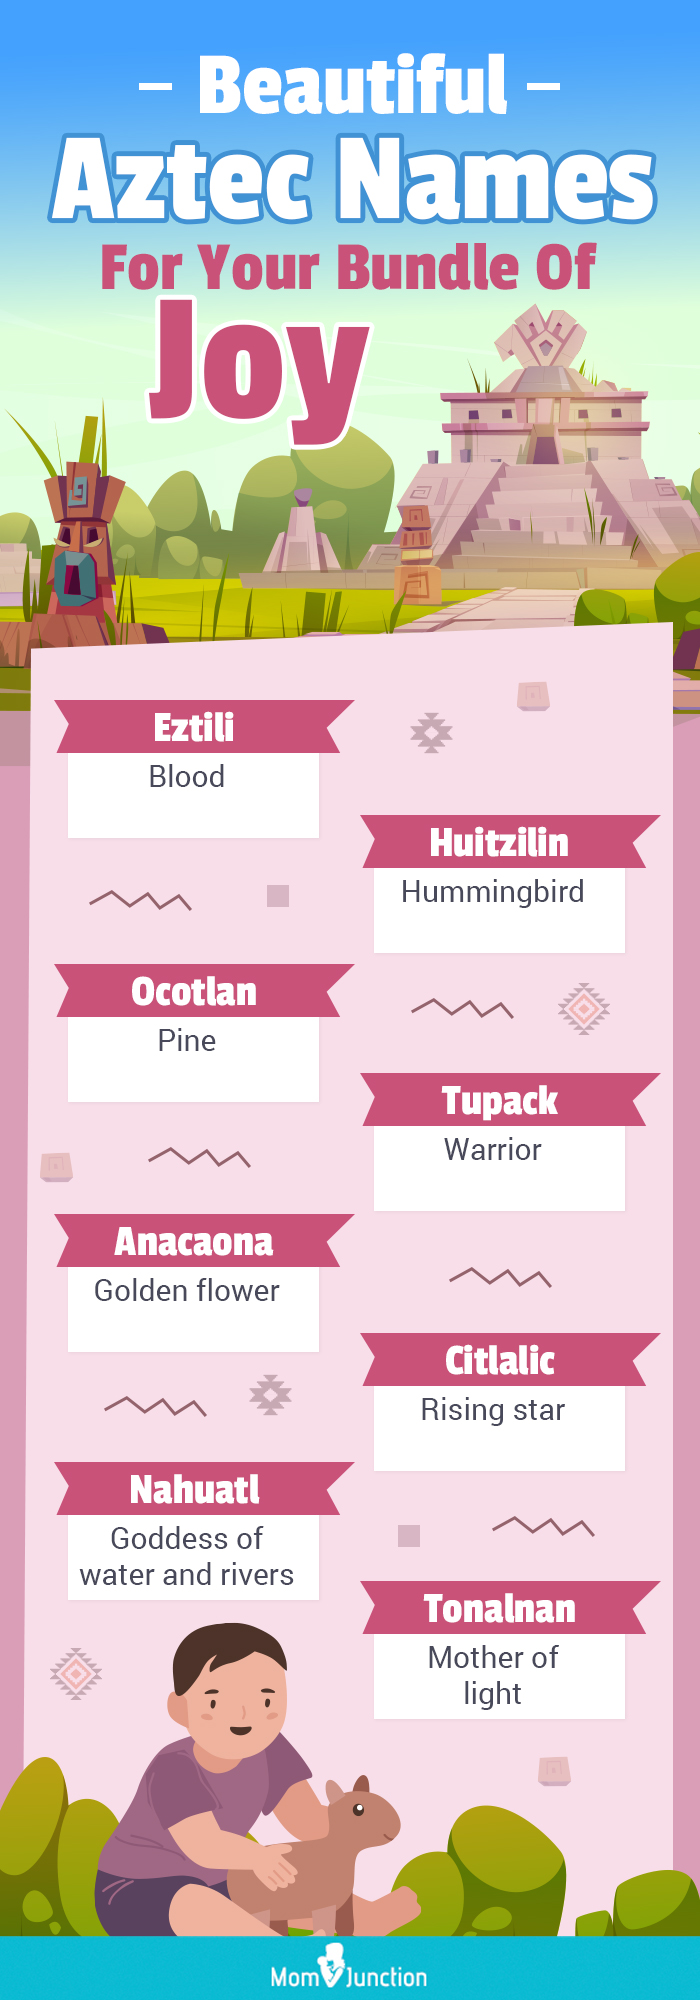 beautiful aztec names for your bundle of joy(infographic)